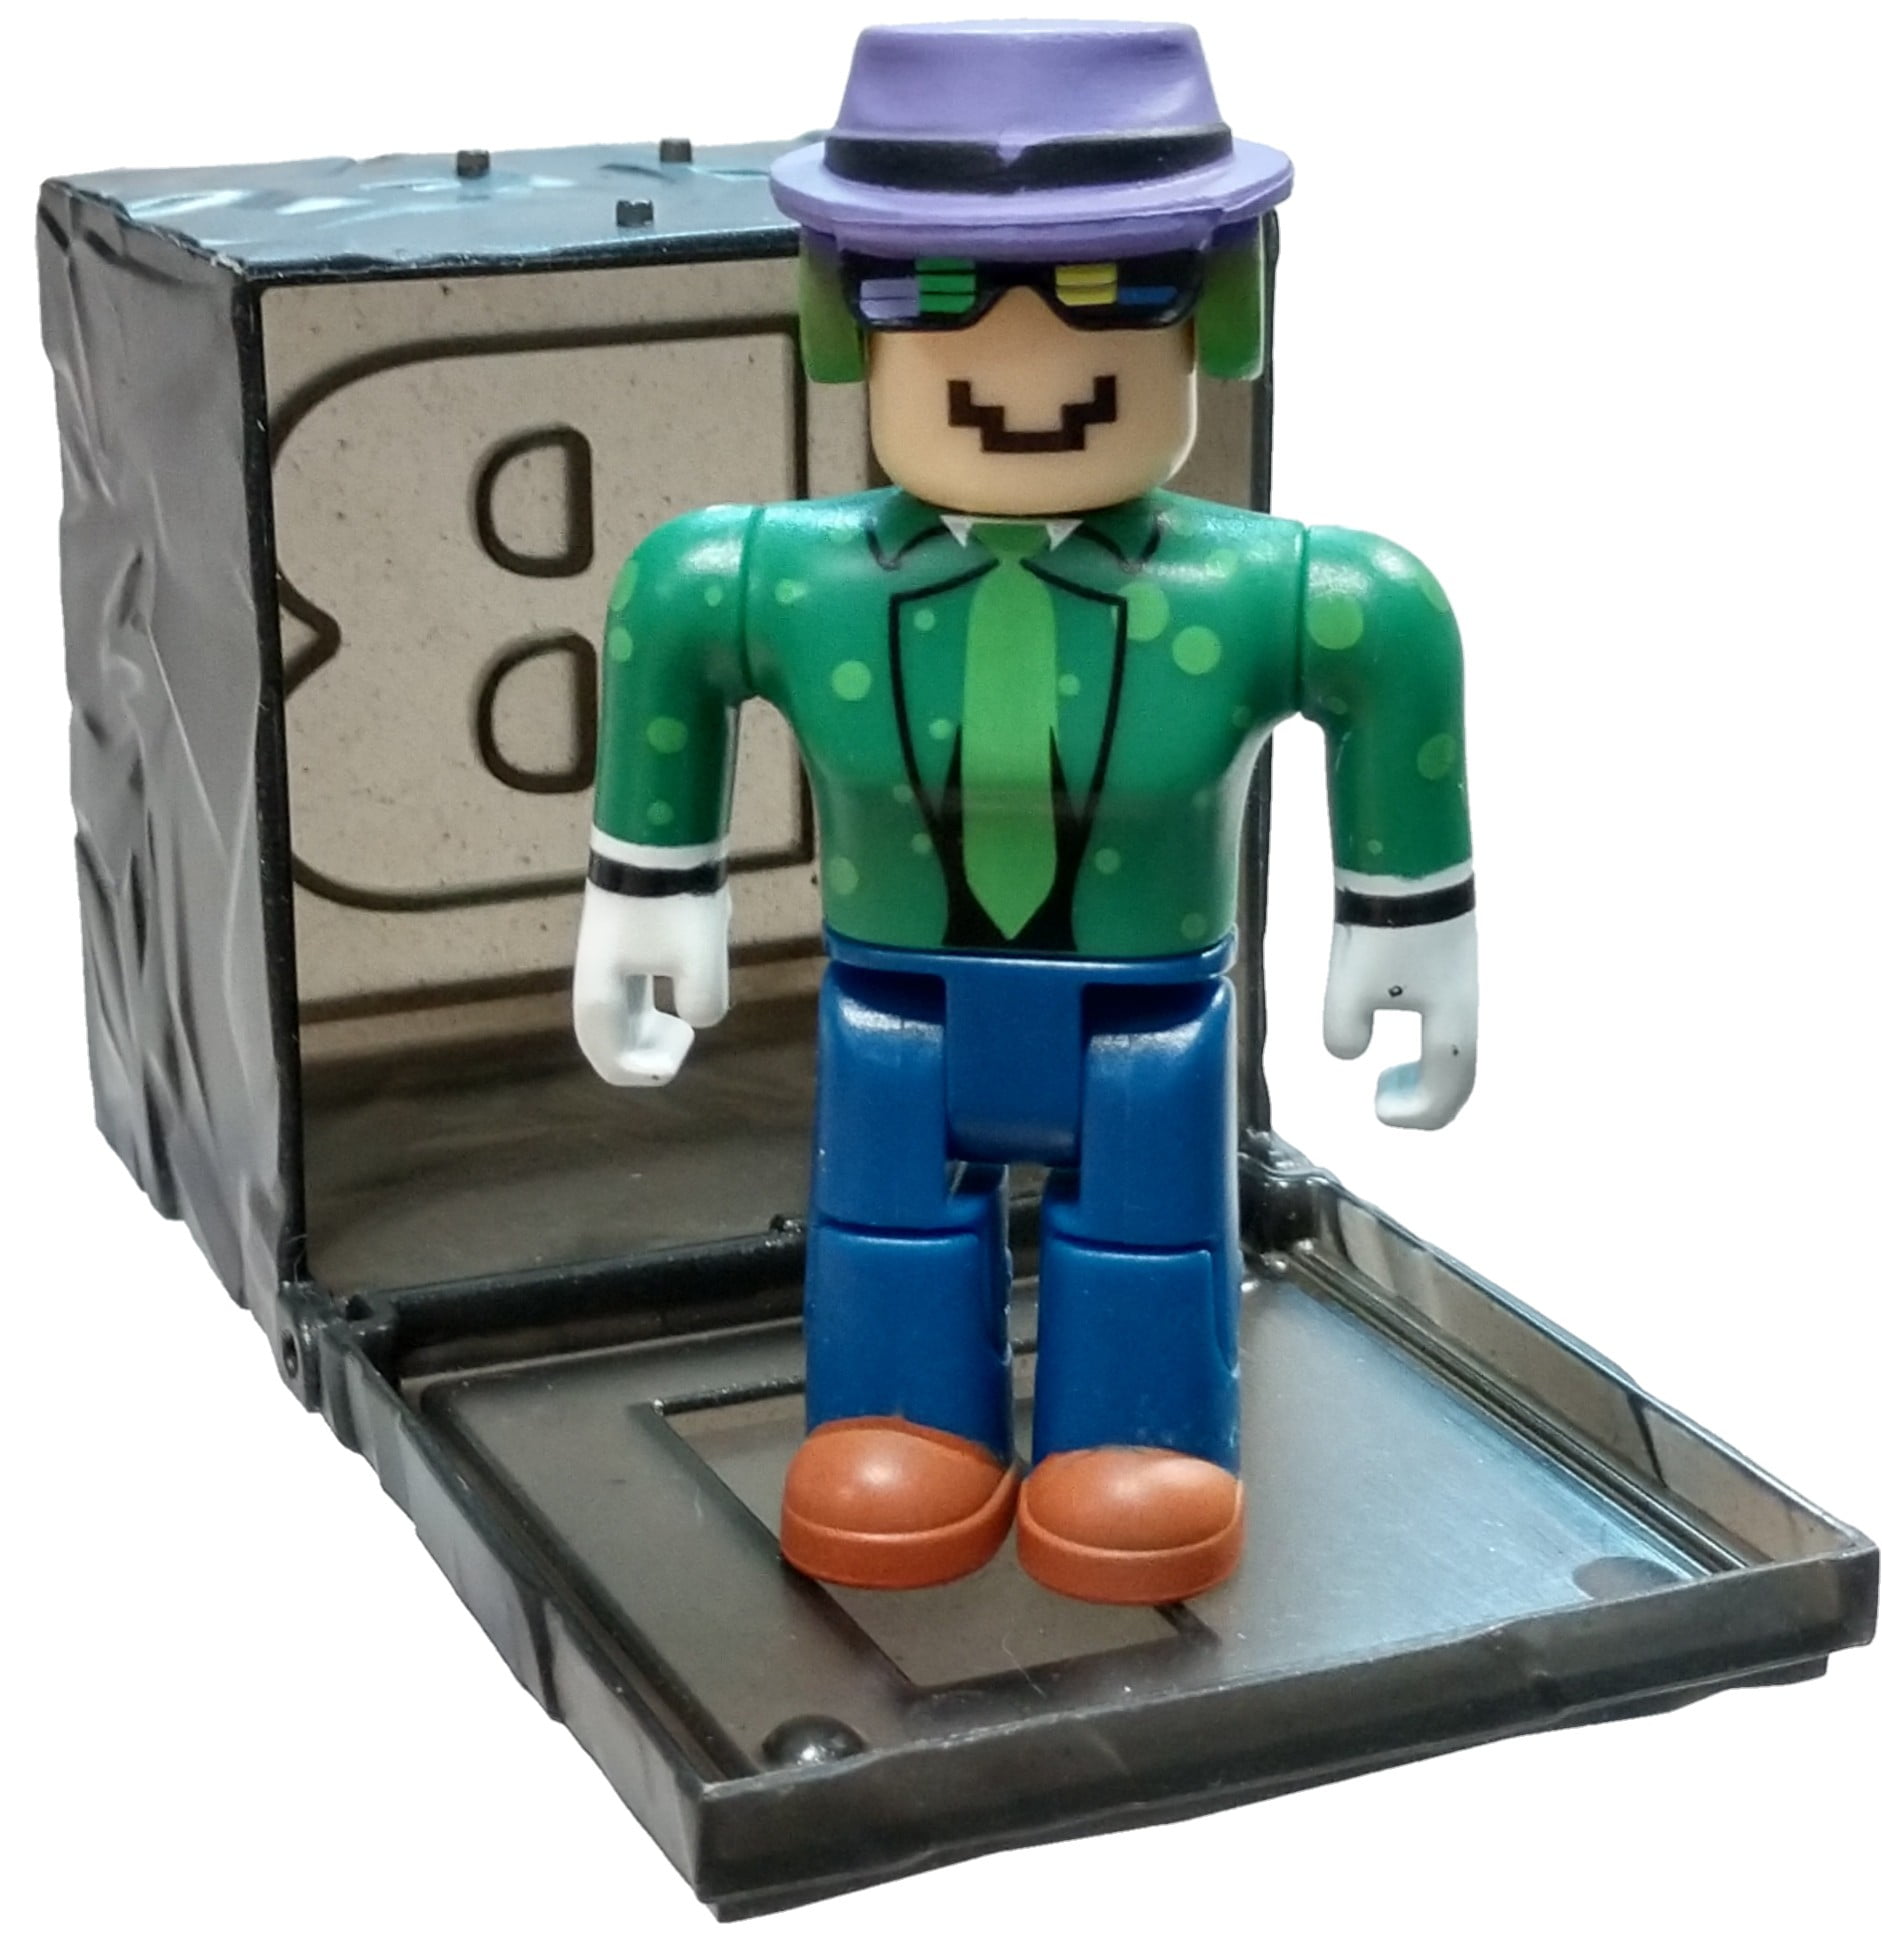 Roblox Series 7 Mrwindy Mini Figure With Black Cube And Online Code No Packaging Walmart Com Walmart Com - roblox red series 3 lumberjack tycoon mini figure blue cube with online code no packaging walmart com walmart com